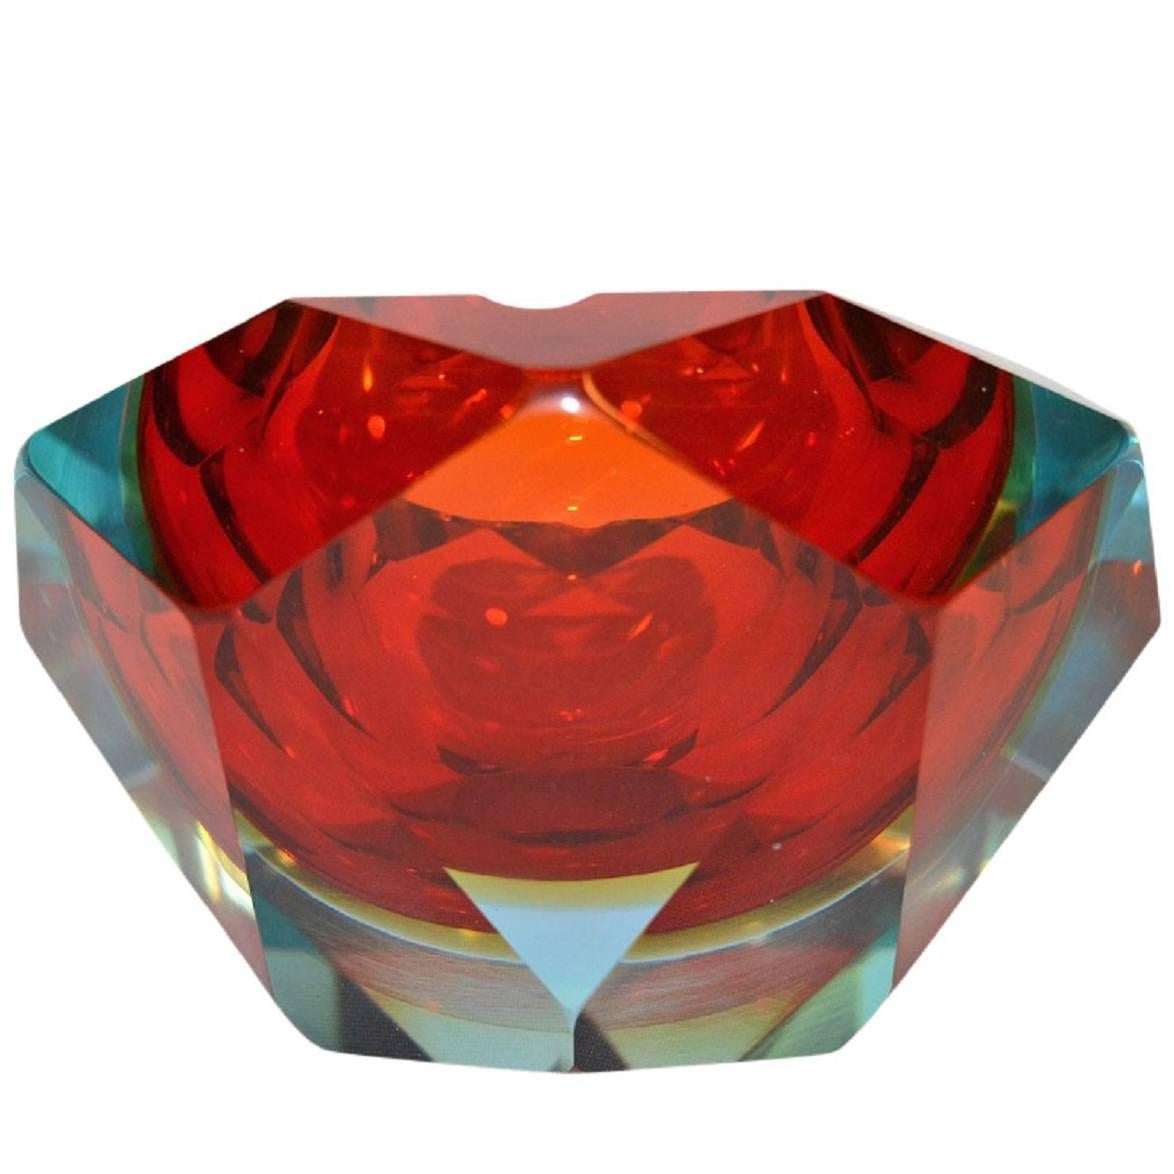 Large, Heavy Flavio Poli Sommerso Murano Ashtray 1950s Faceted Red Blue Glass For Sale